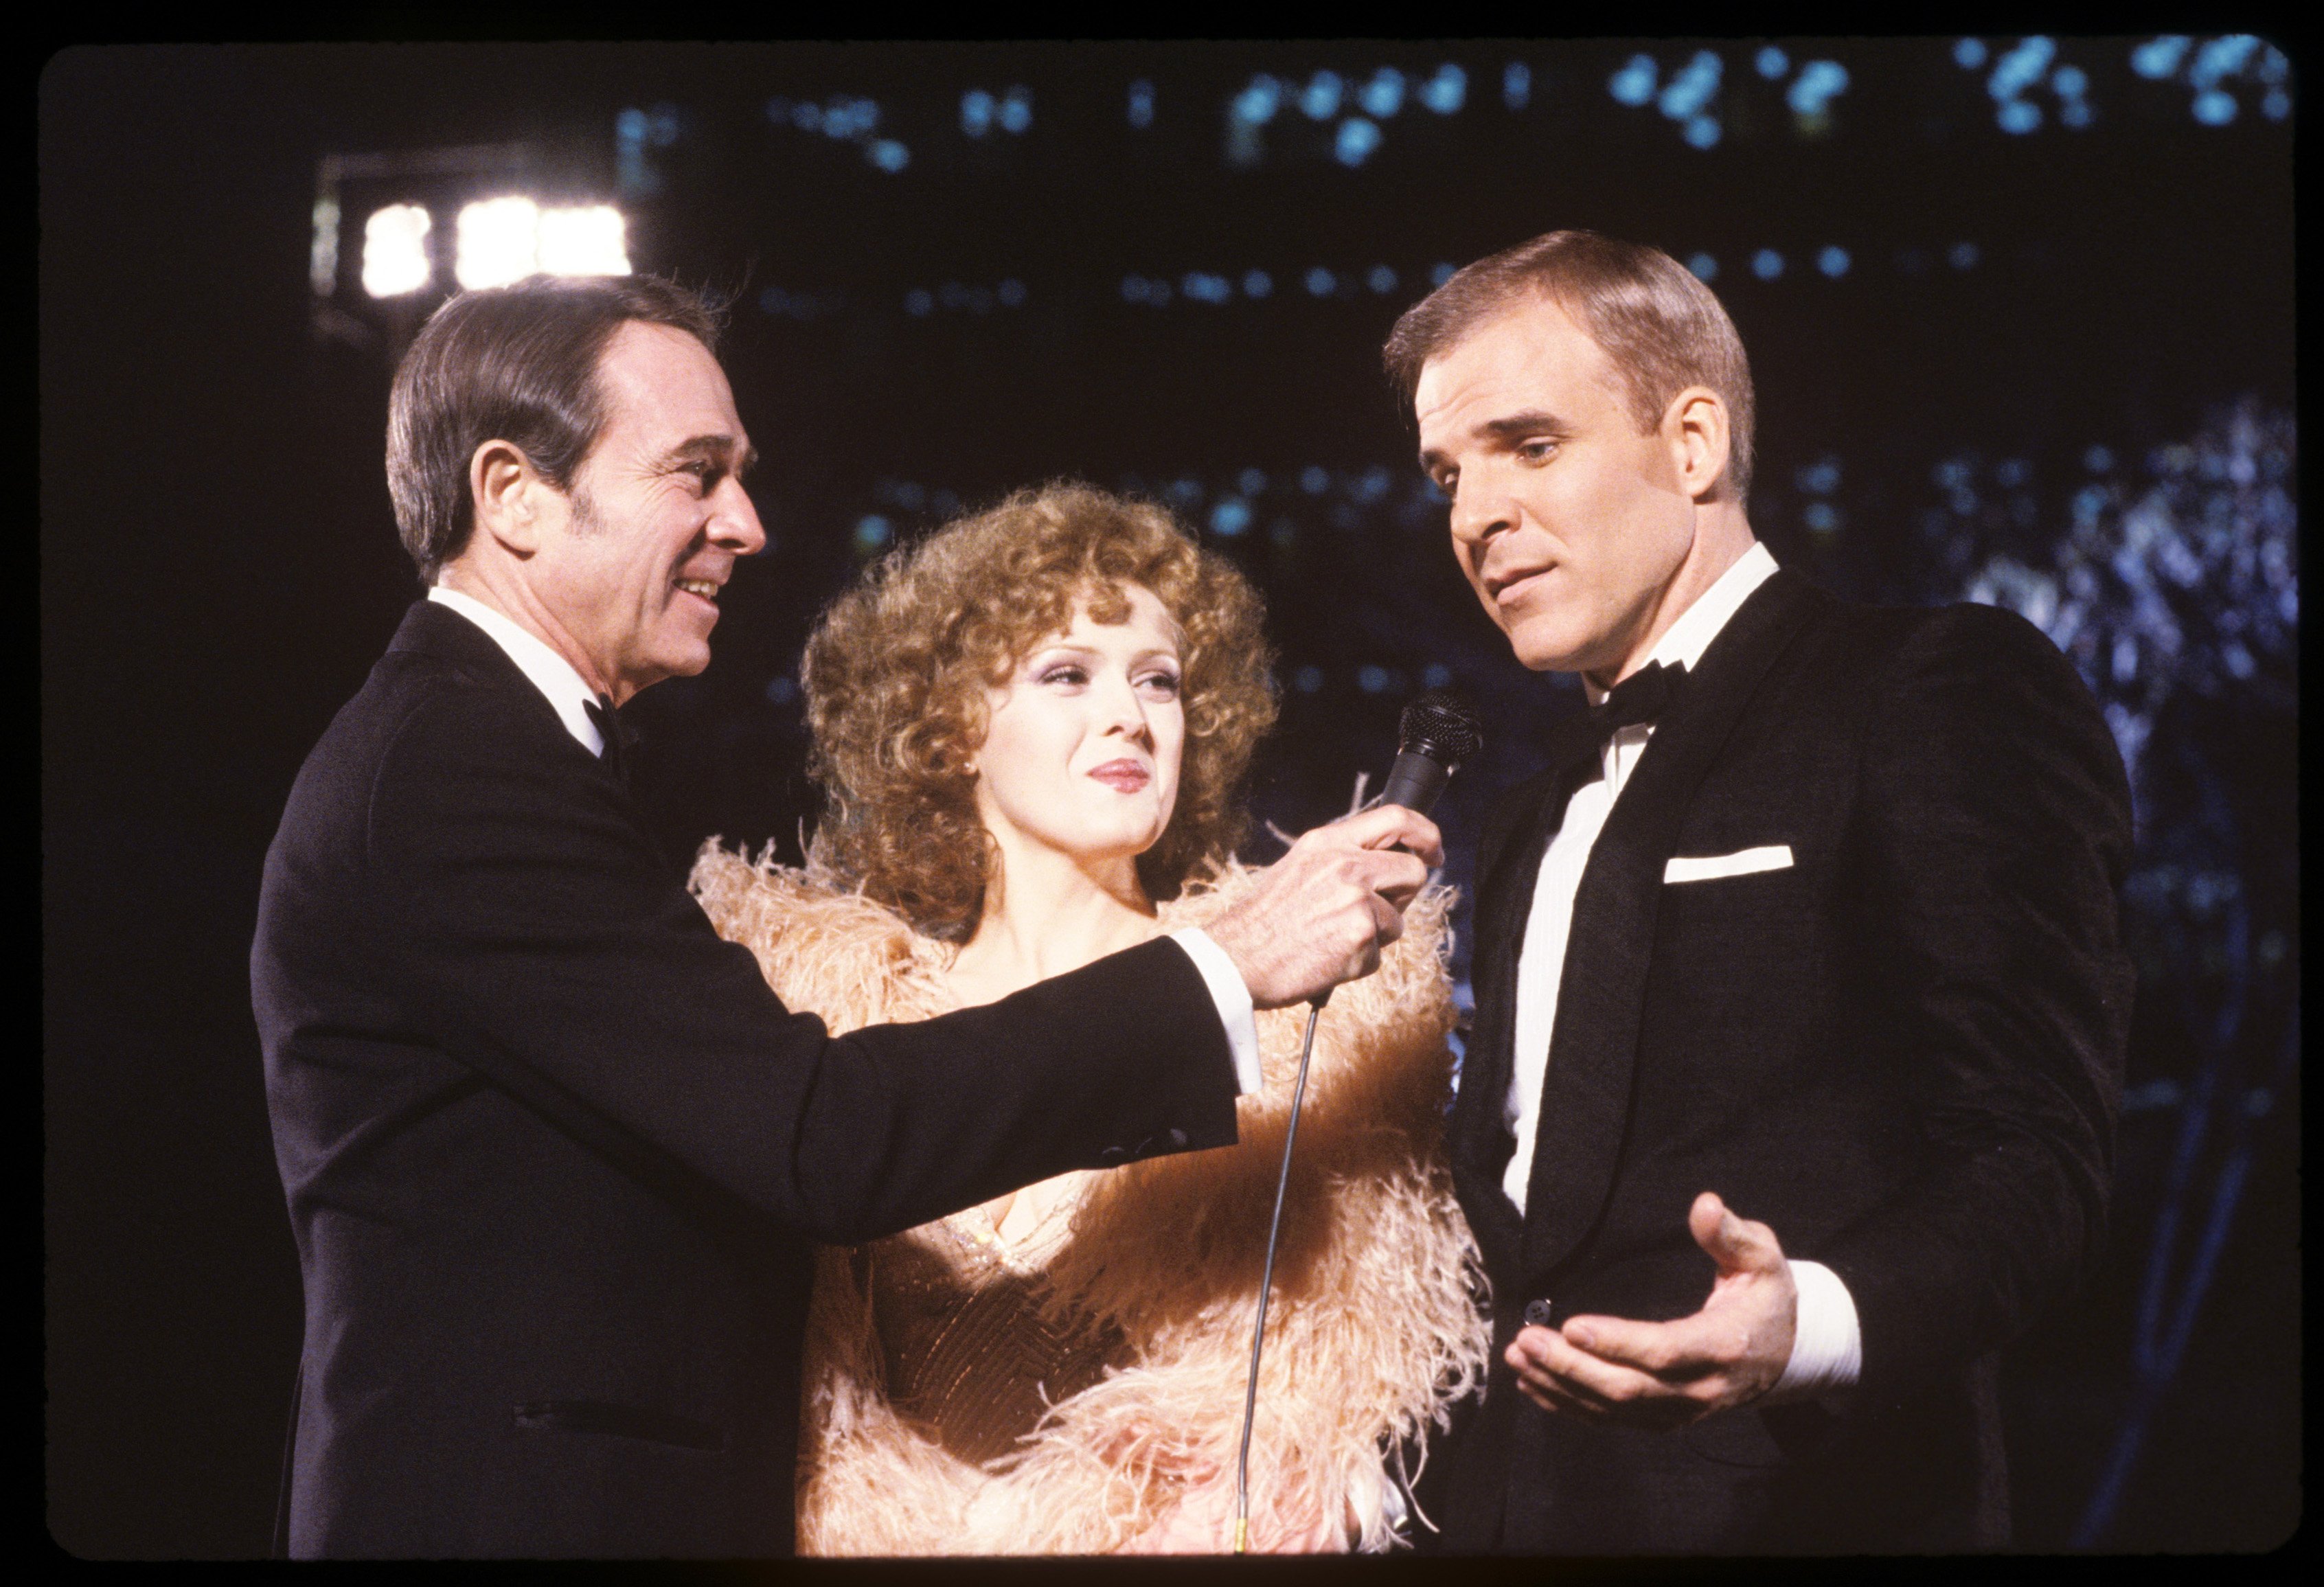 Bernadette Peters and Steve Martin during the 53rd Academy Awards, March 31, 1981. | Source: Getty Images